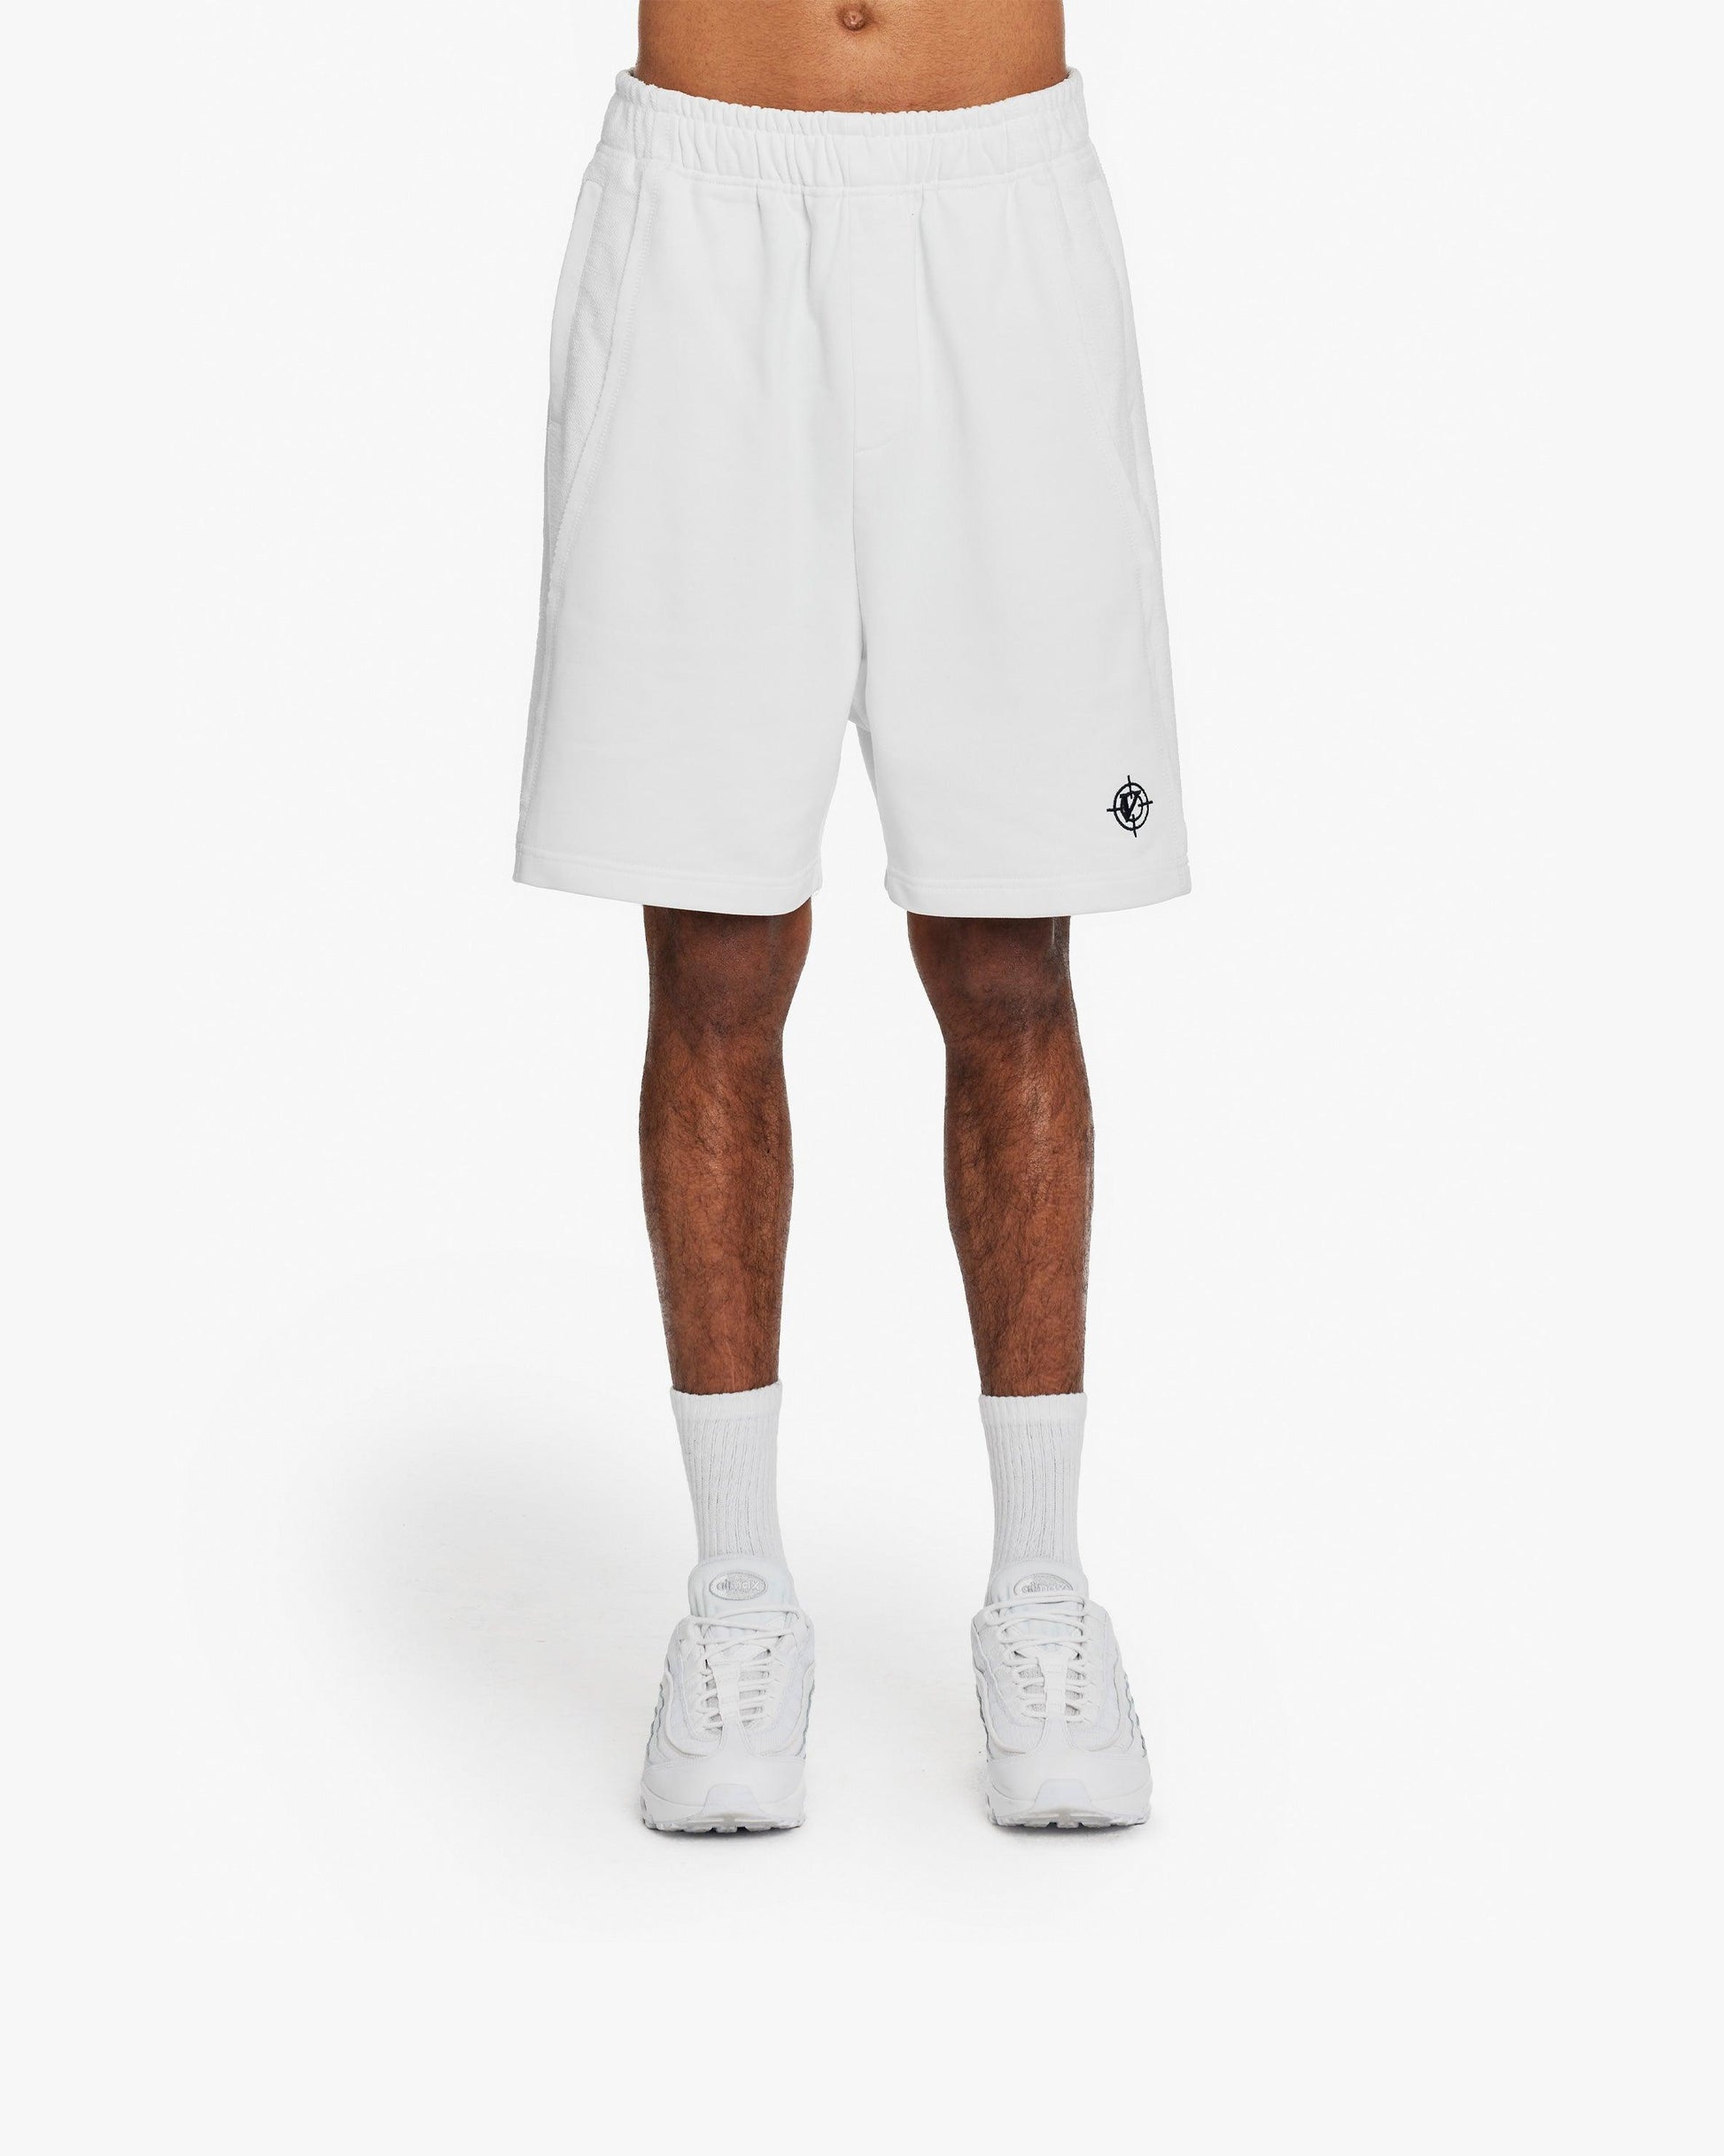 INSIDE OUT SHORTS WHITE - VICINITY